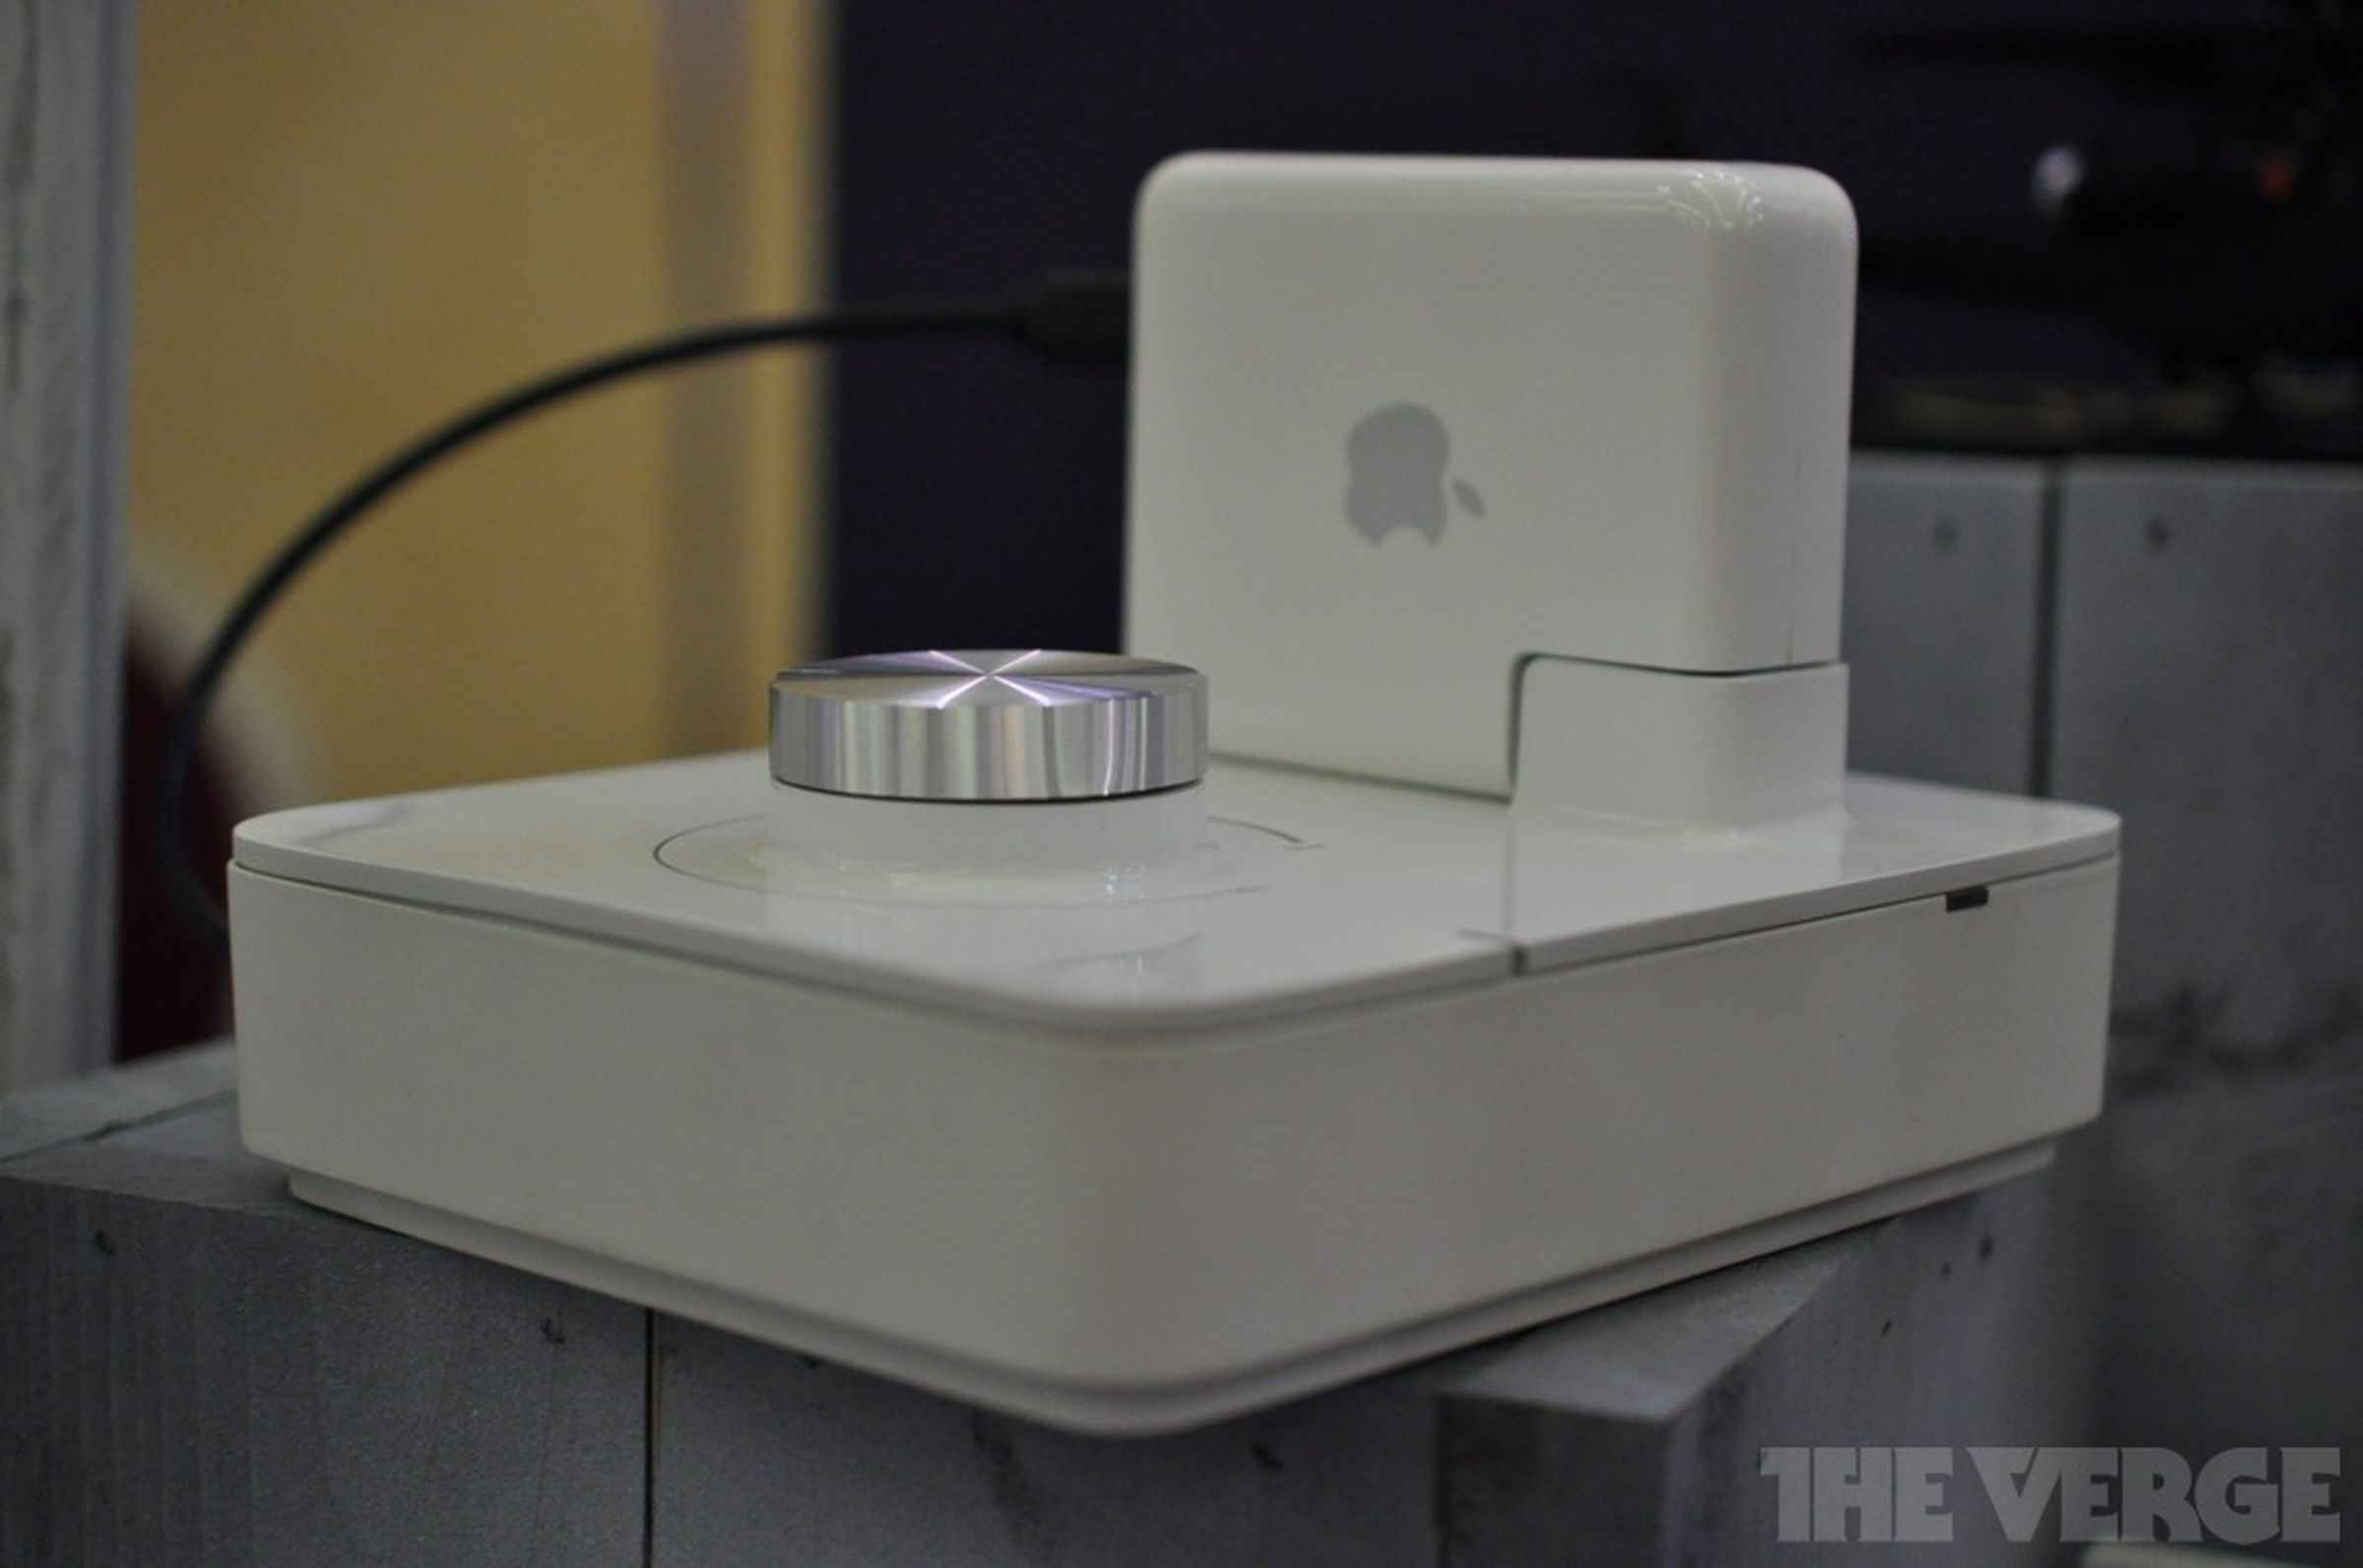 Griffin Twenty audio amp and AirPlay adapter